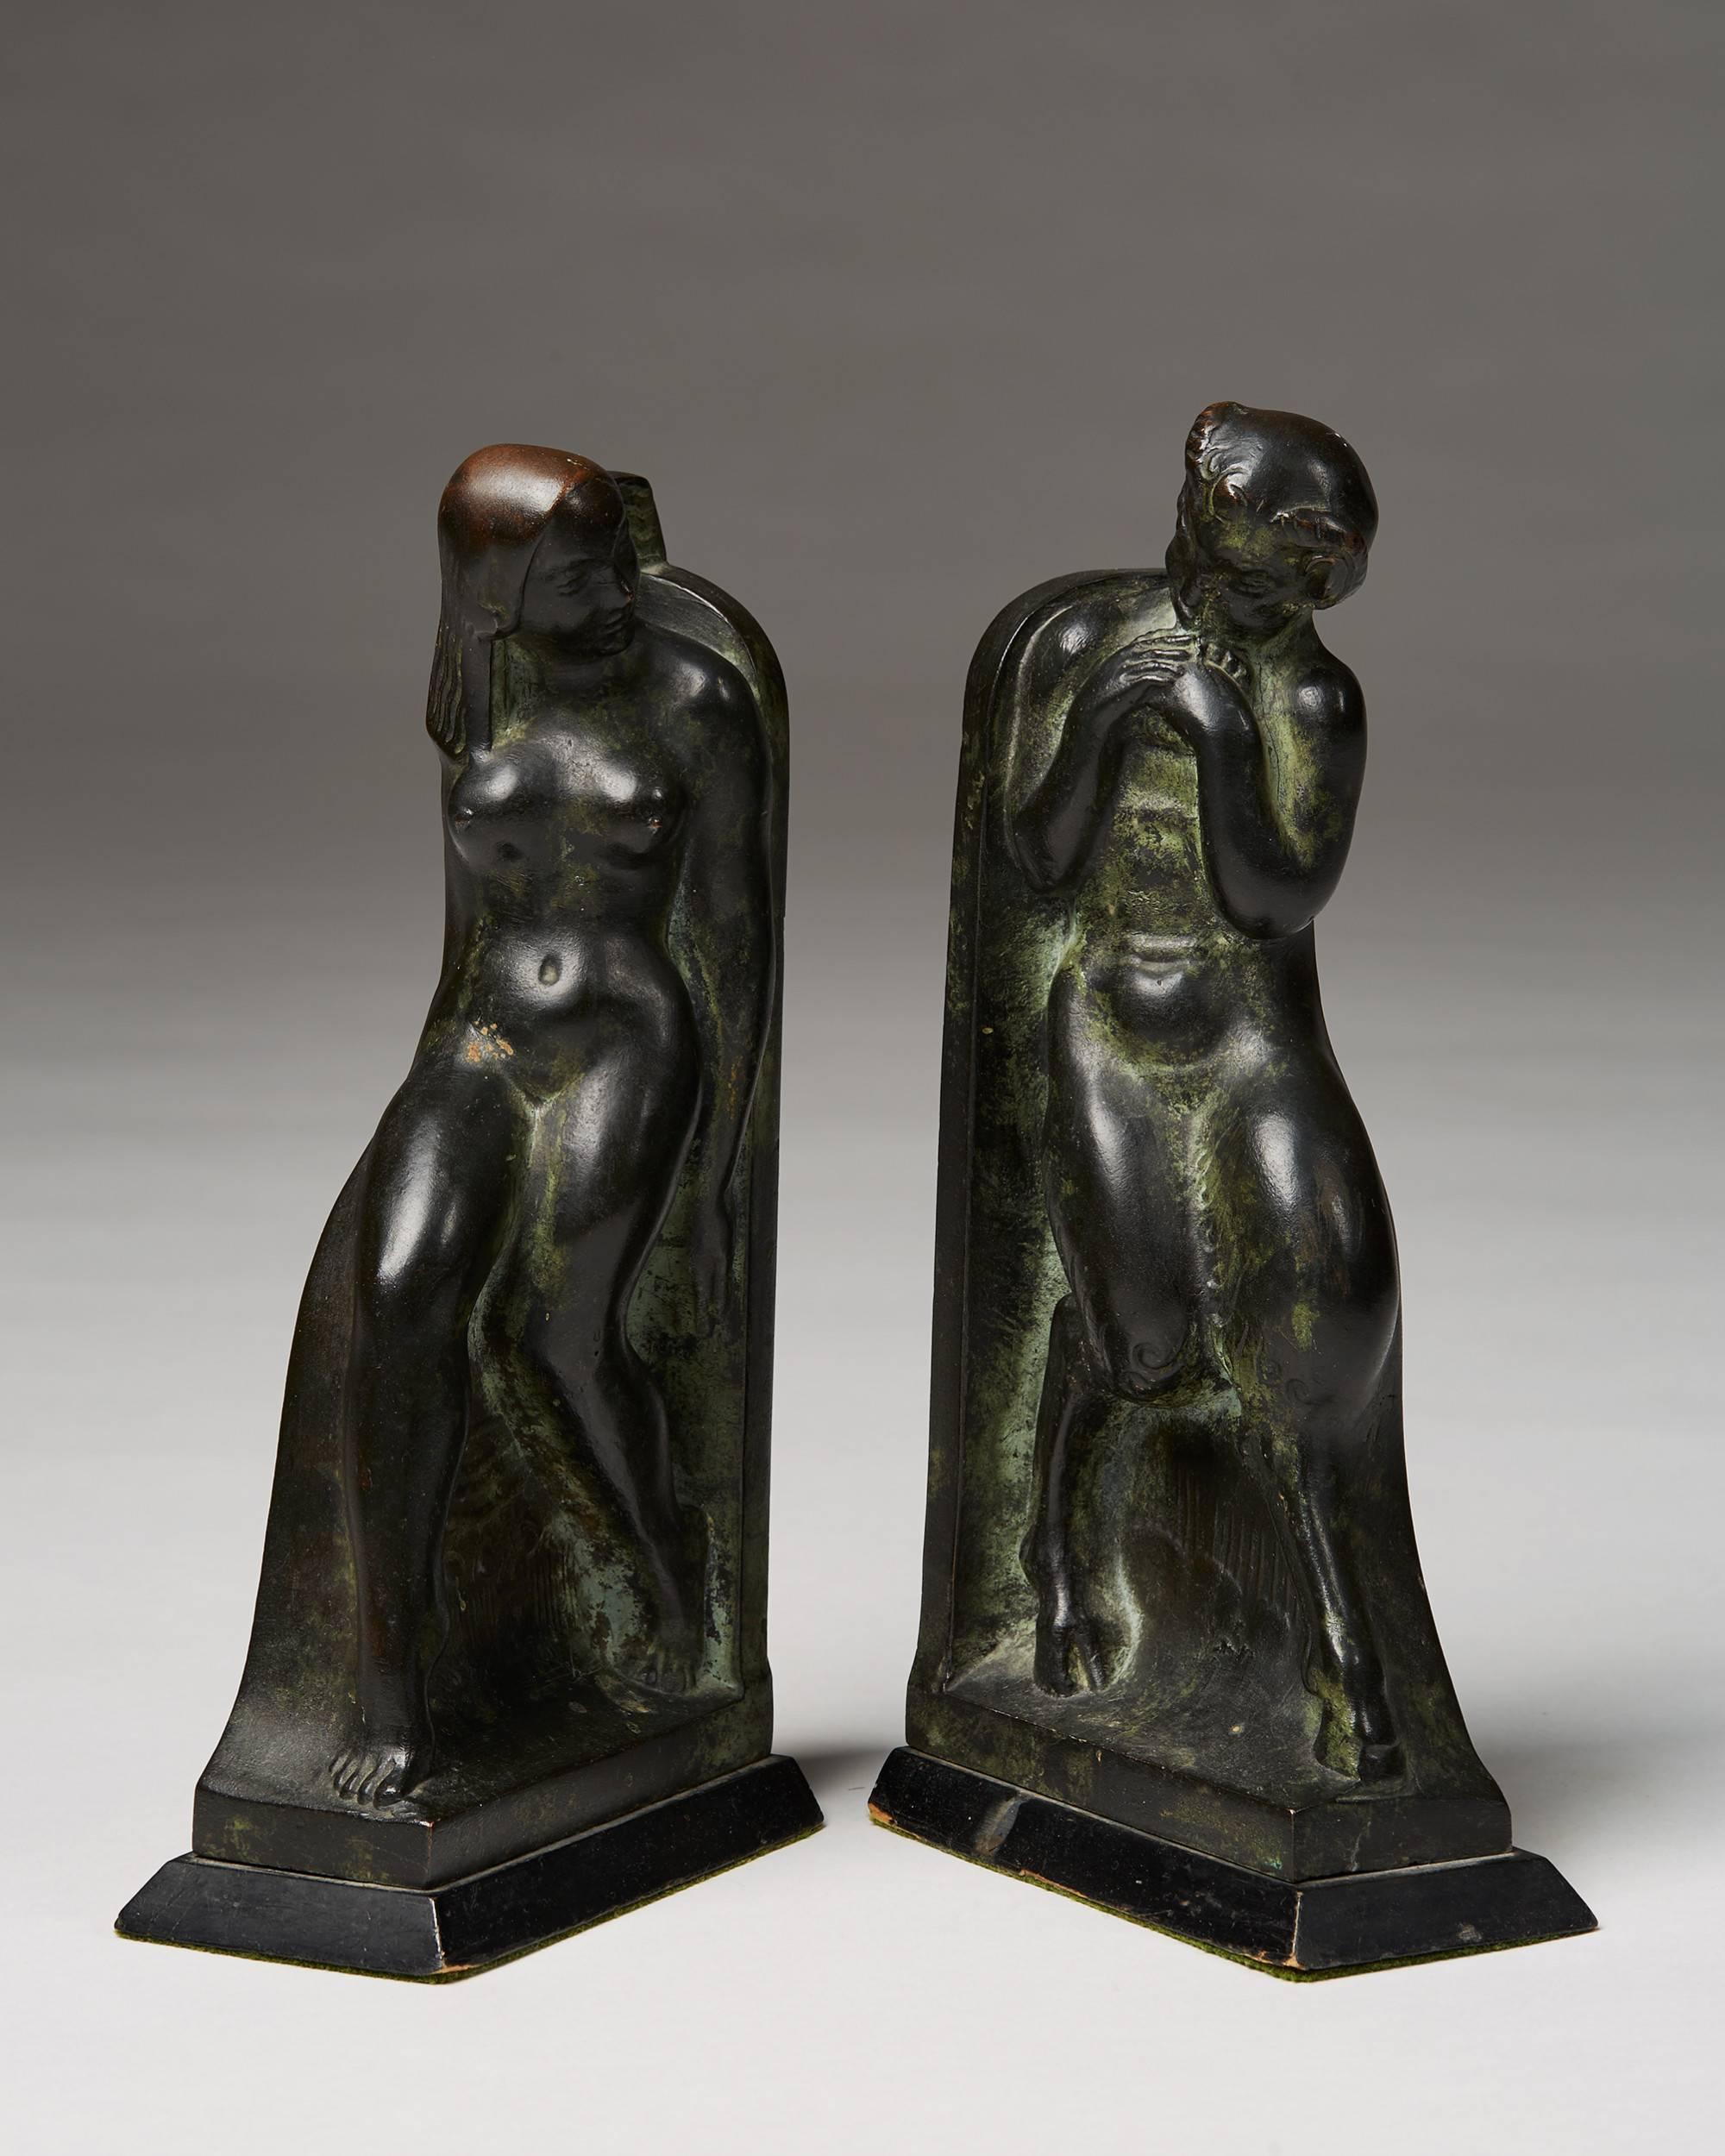 Pair of bookends designed by Axel Gute, Sweden, 1919.
Bronze with wood bases.
Measure: H 27 cm/ 10 1/2''.